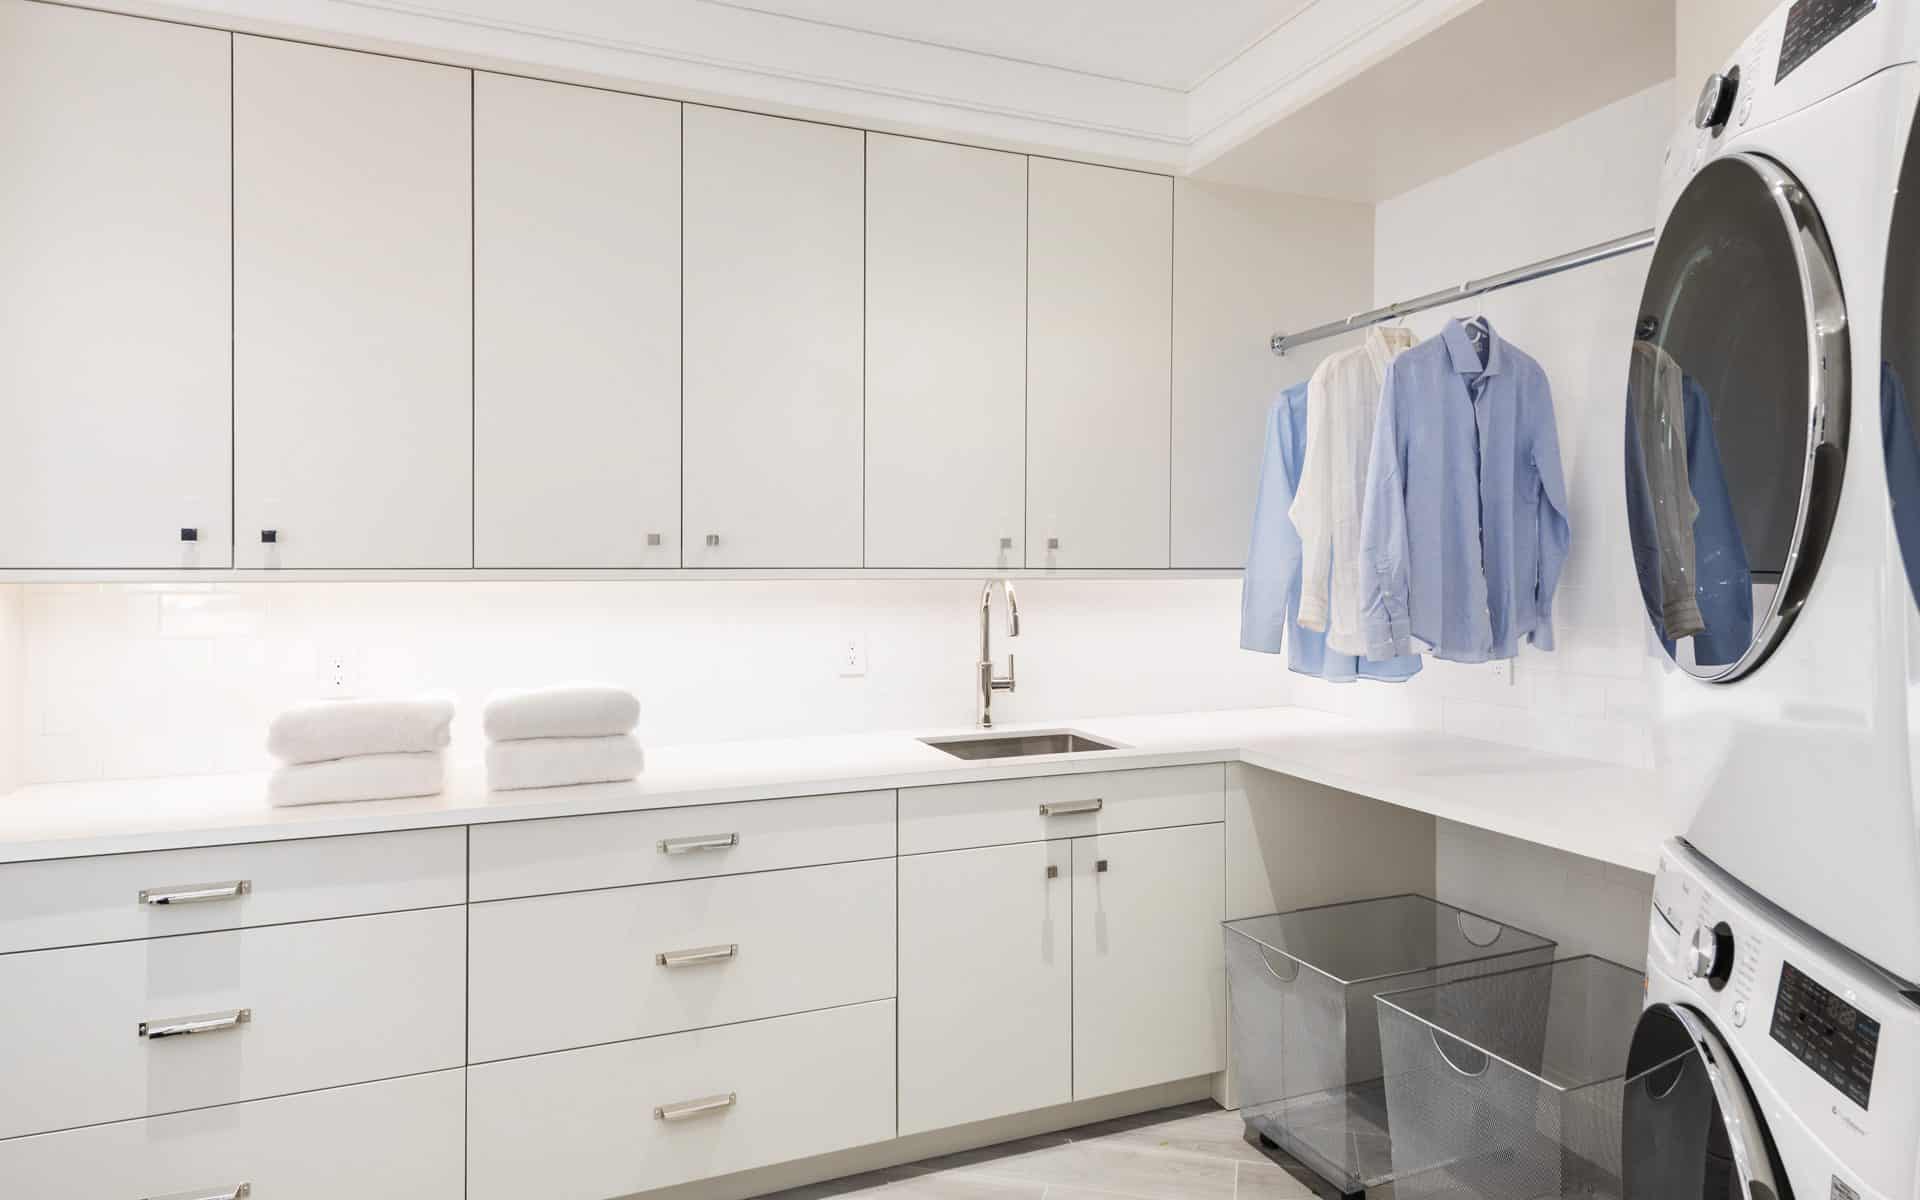 Custom laundry room features white Bilotta cabinetry, ample storage, and functional folding area.